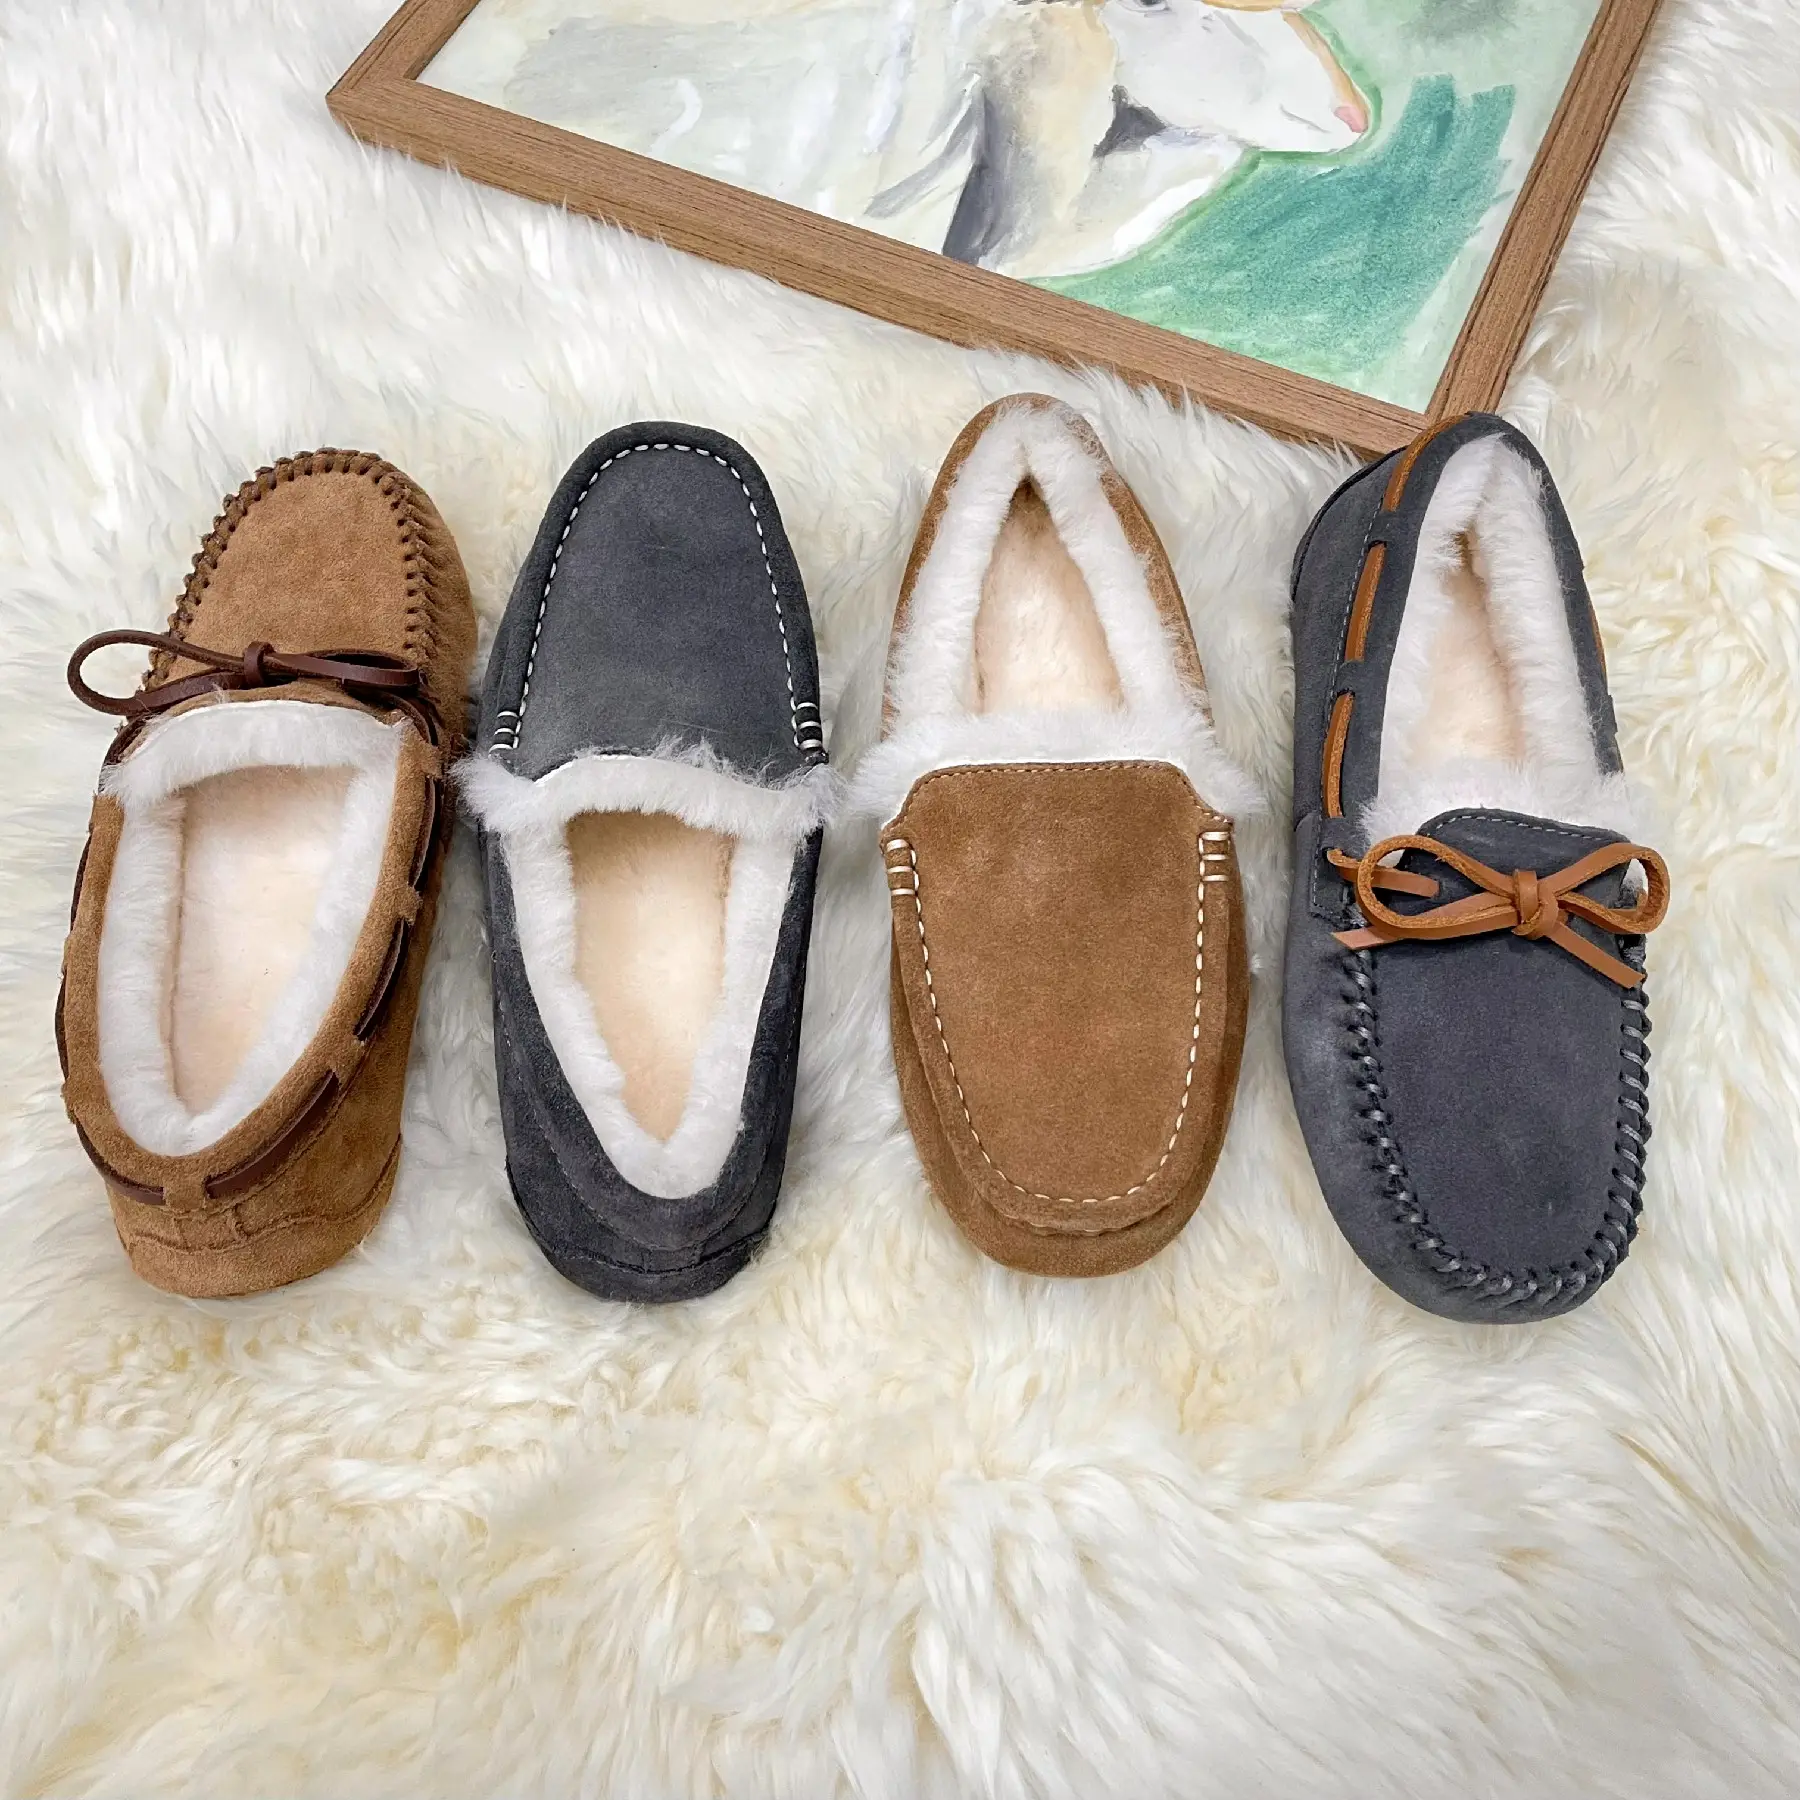 Shoe manufacturer of comfort leather moccasins ladies stylish flats loafers for women shoes